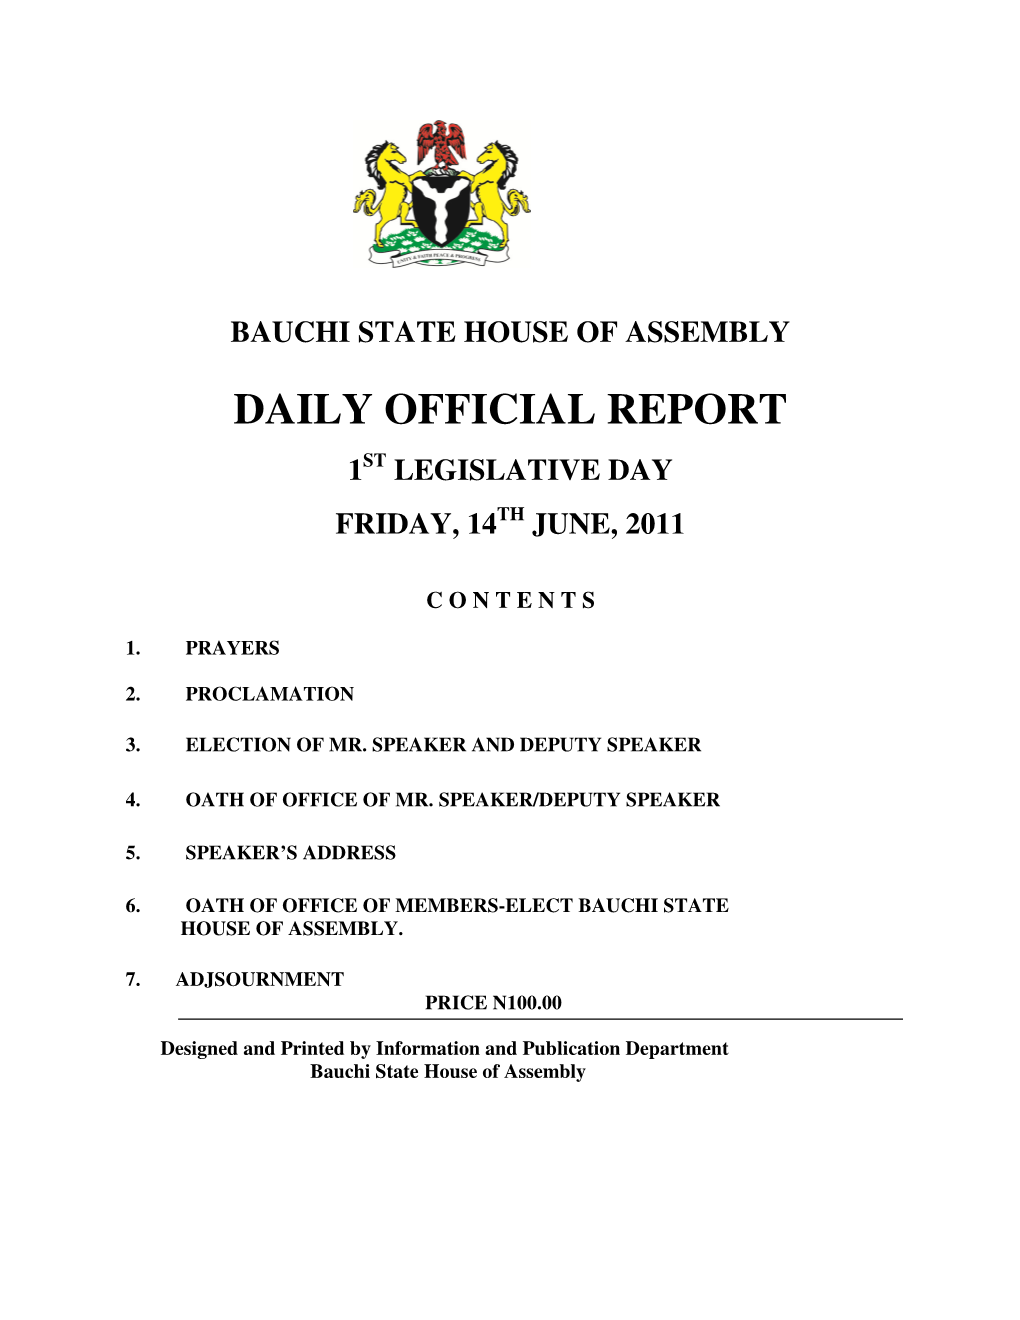 Daily Official Report